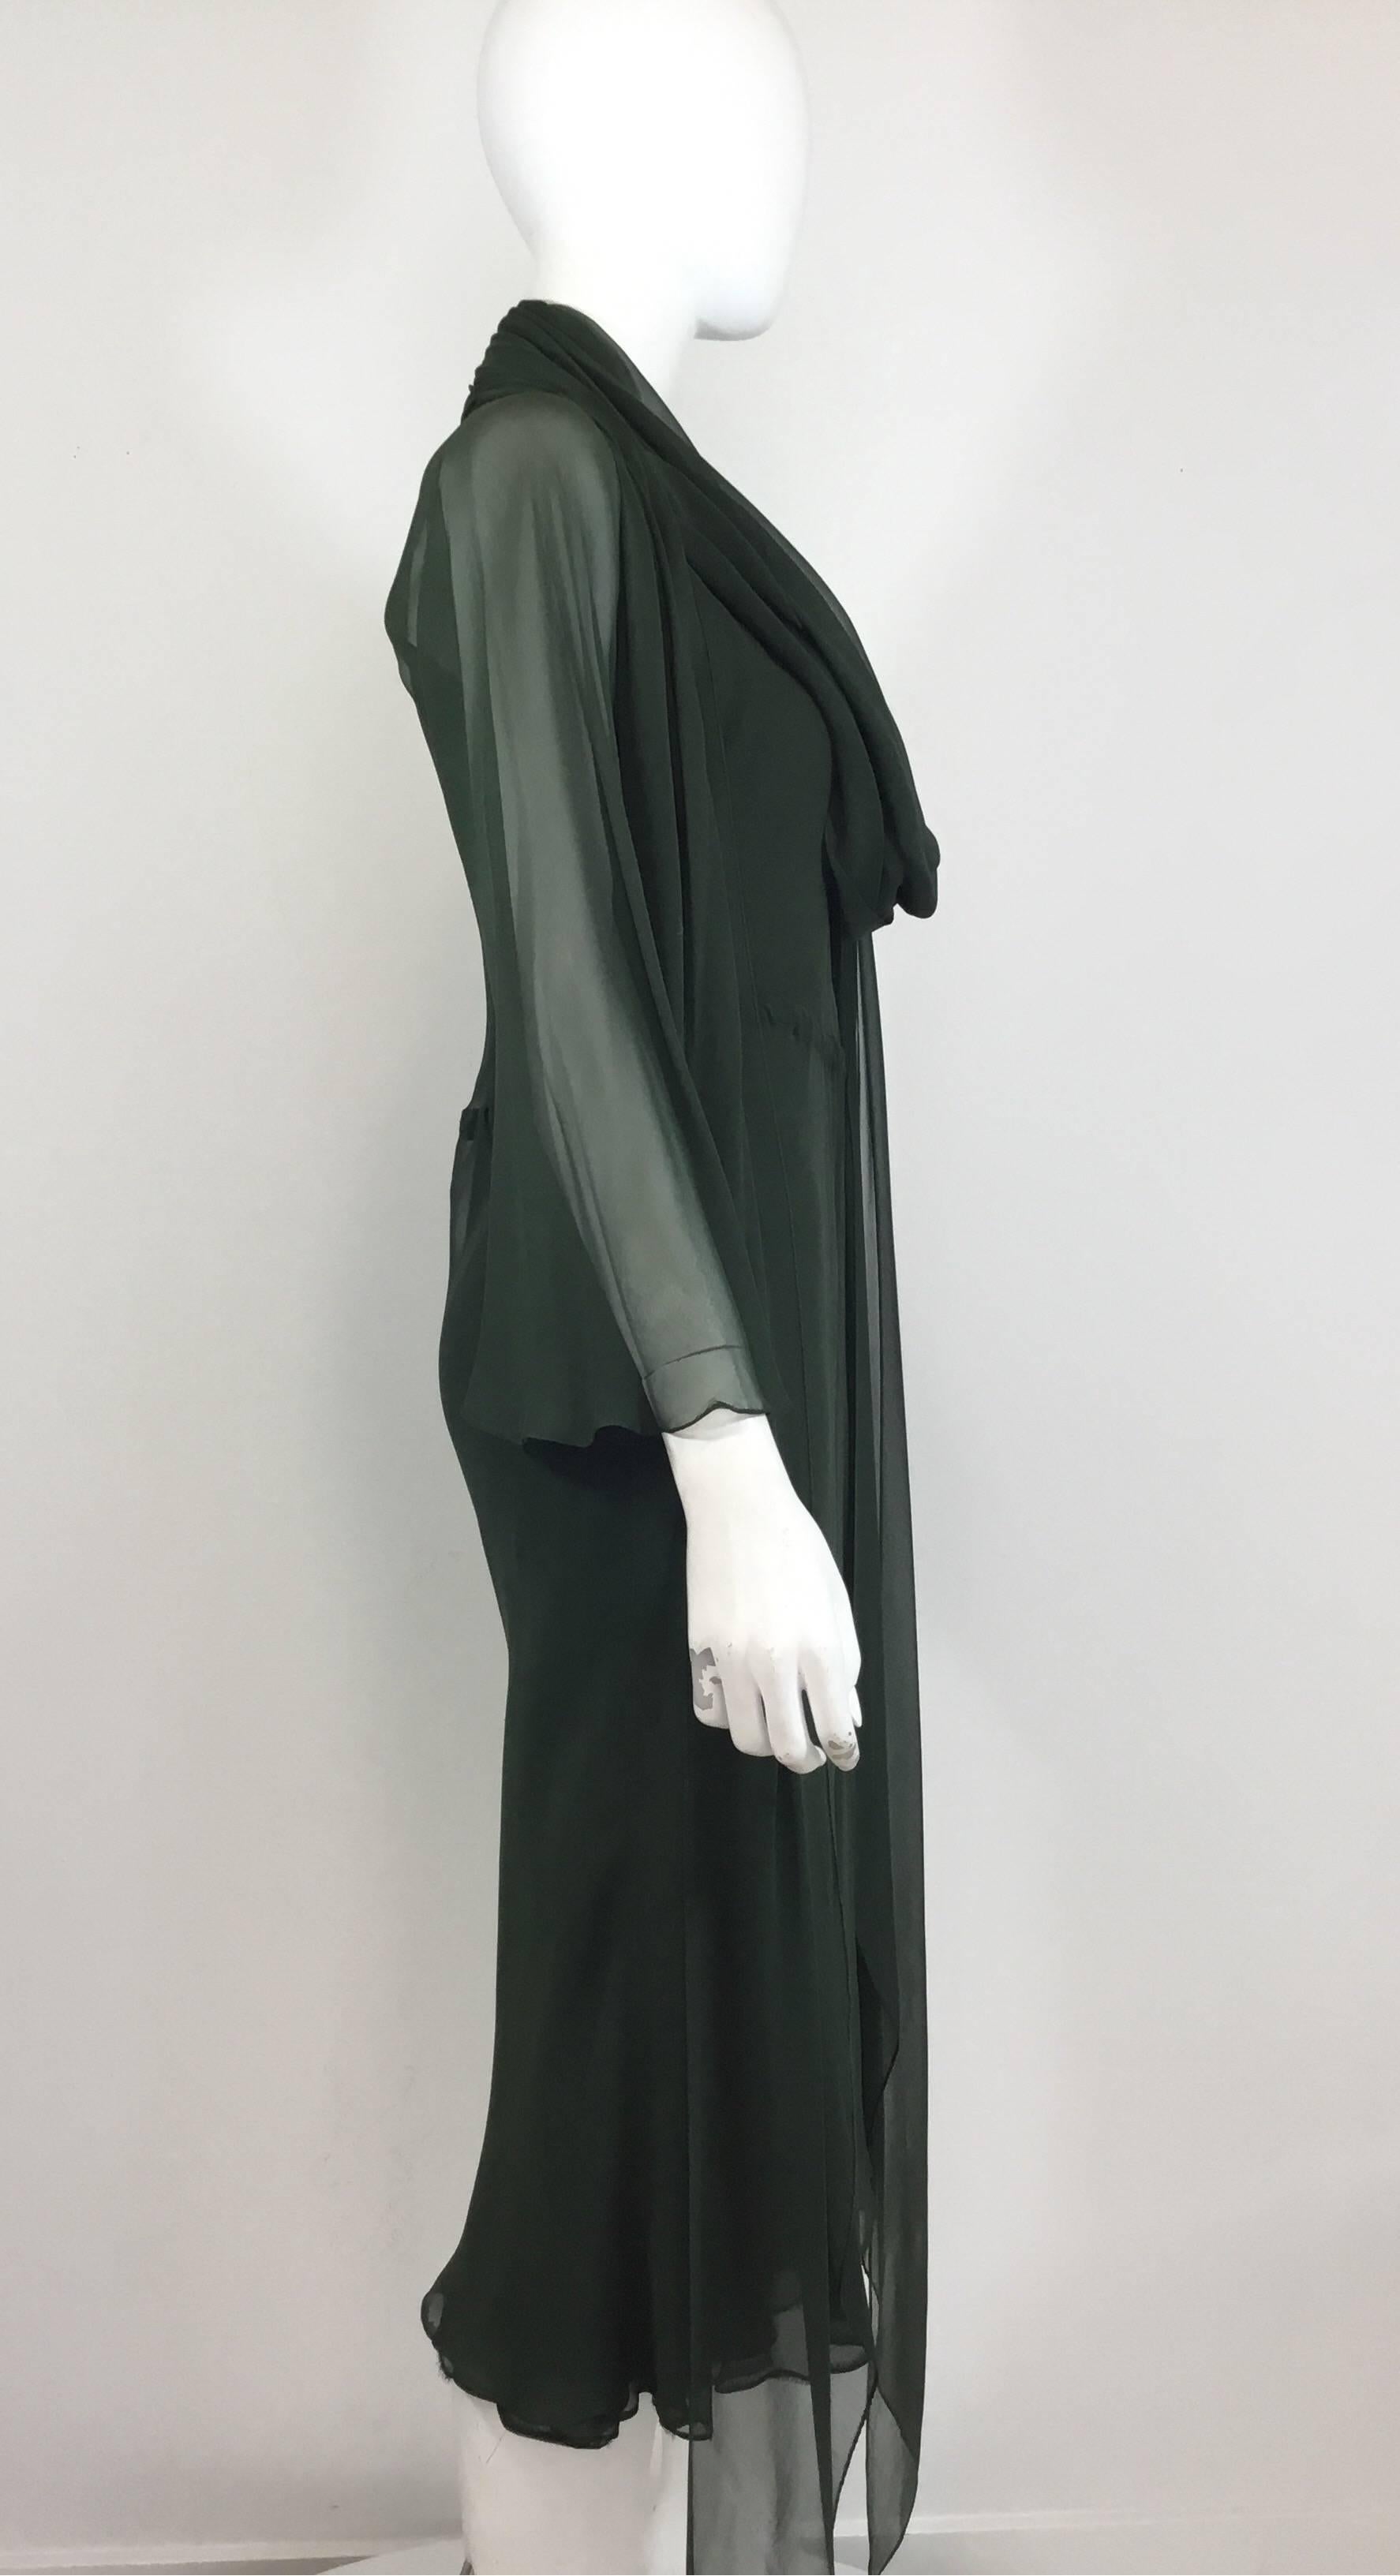 Halston chiffon dress features a draped, cowl neckline and flowy long sleeves. Dress has a slip on entry with an elastic band around the waist. Slip dress and scarf included. 

bust 36'', sleeves 28'', waist 32'', hips 38'', length 49''

*Dress has